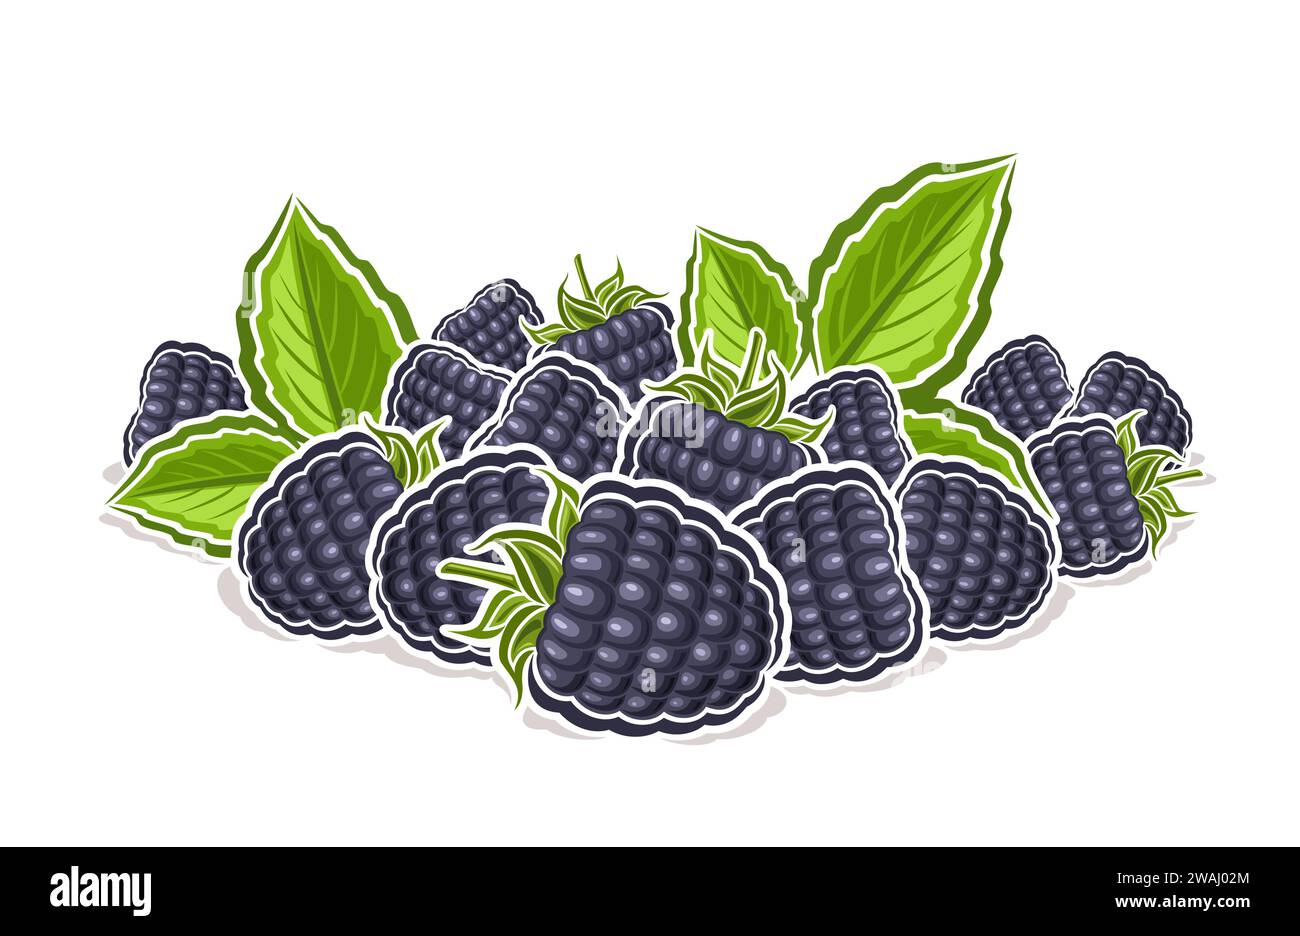 Vector logo for Blackberry, decorative horizontal poster with outline illustration of ripe blackberry composition with green sprigs, cartoon design fr Stock Vector